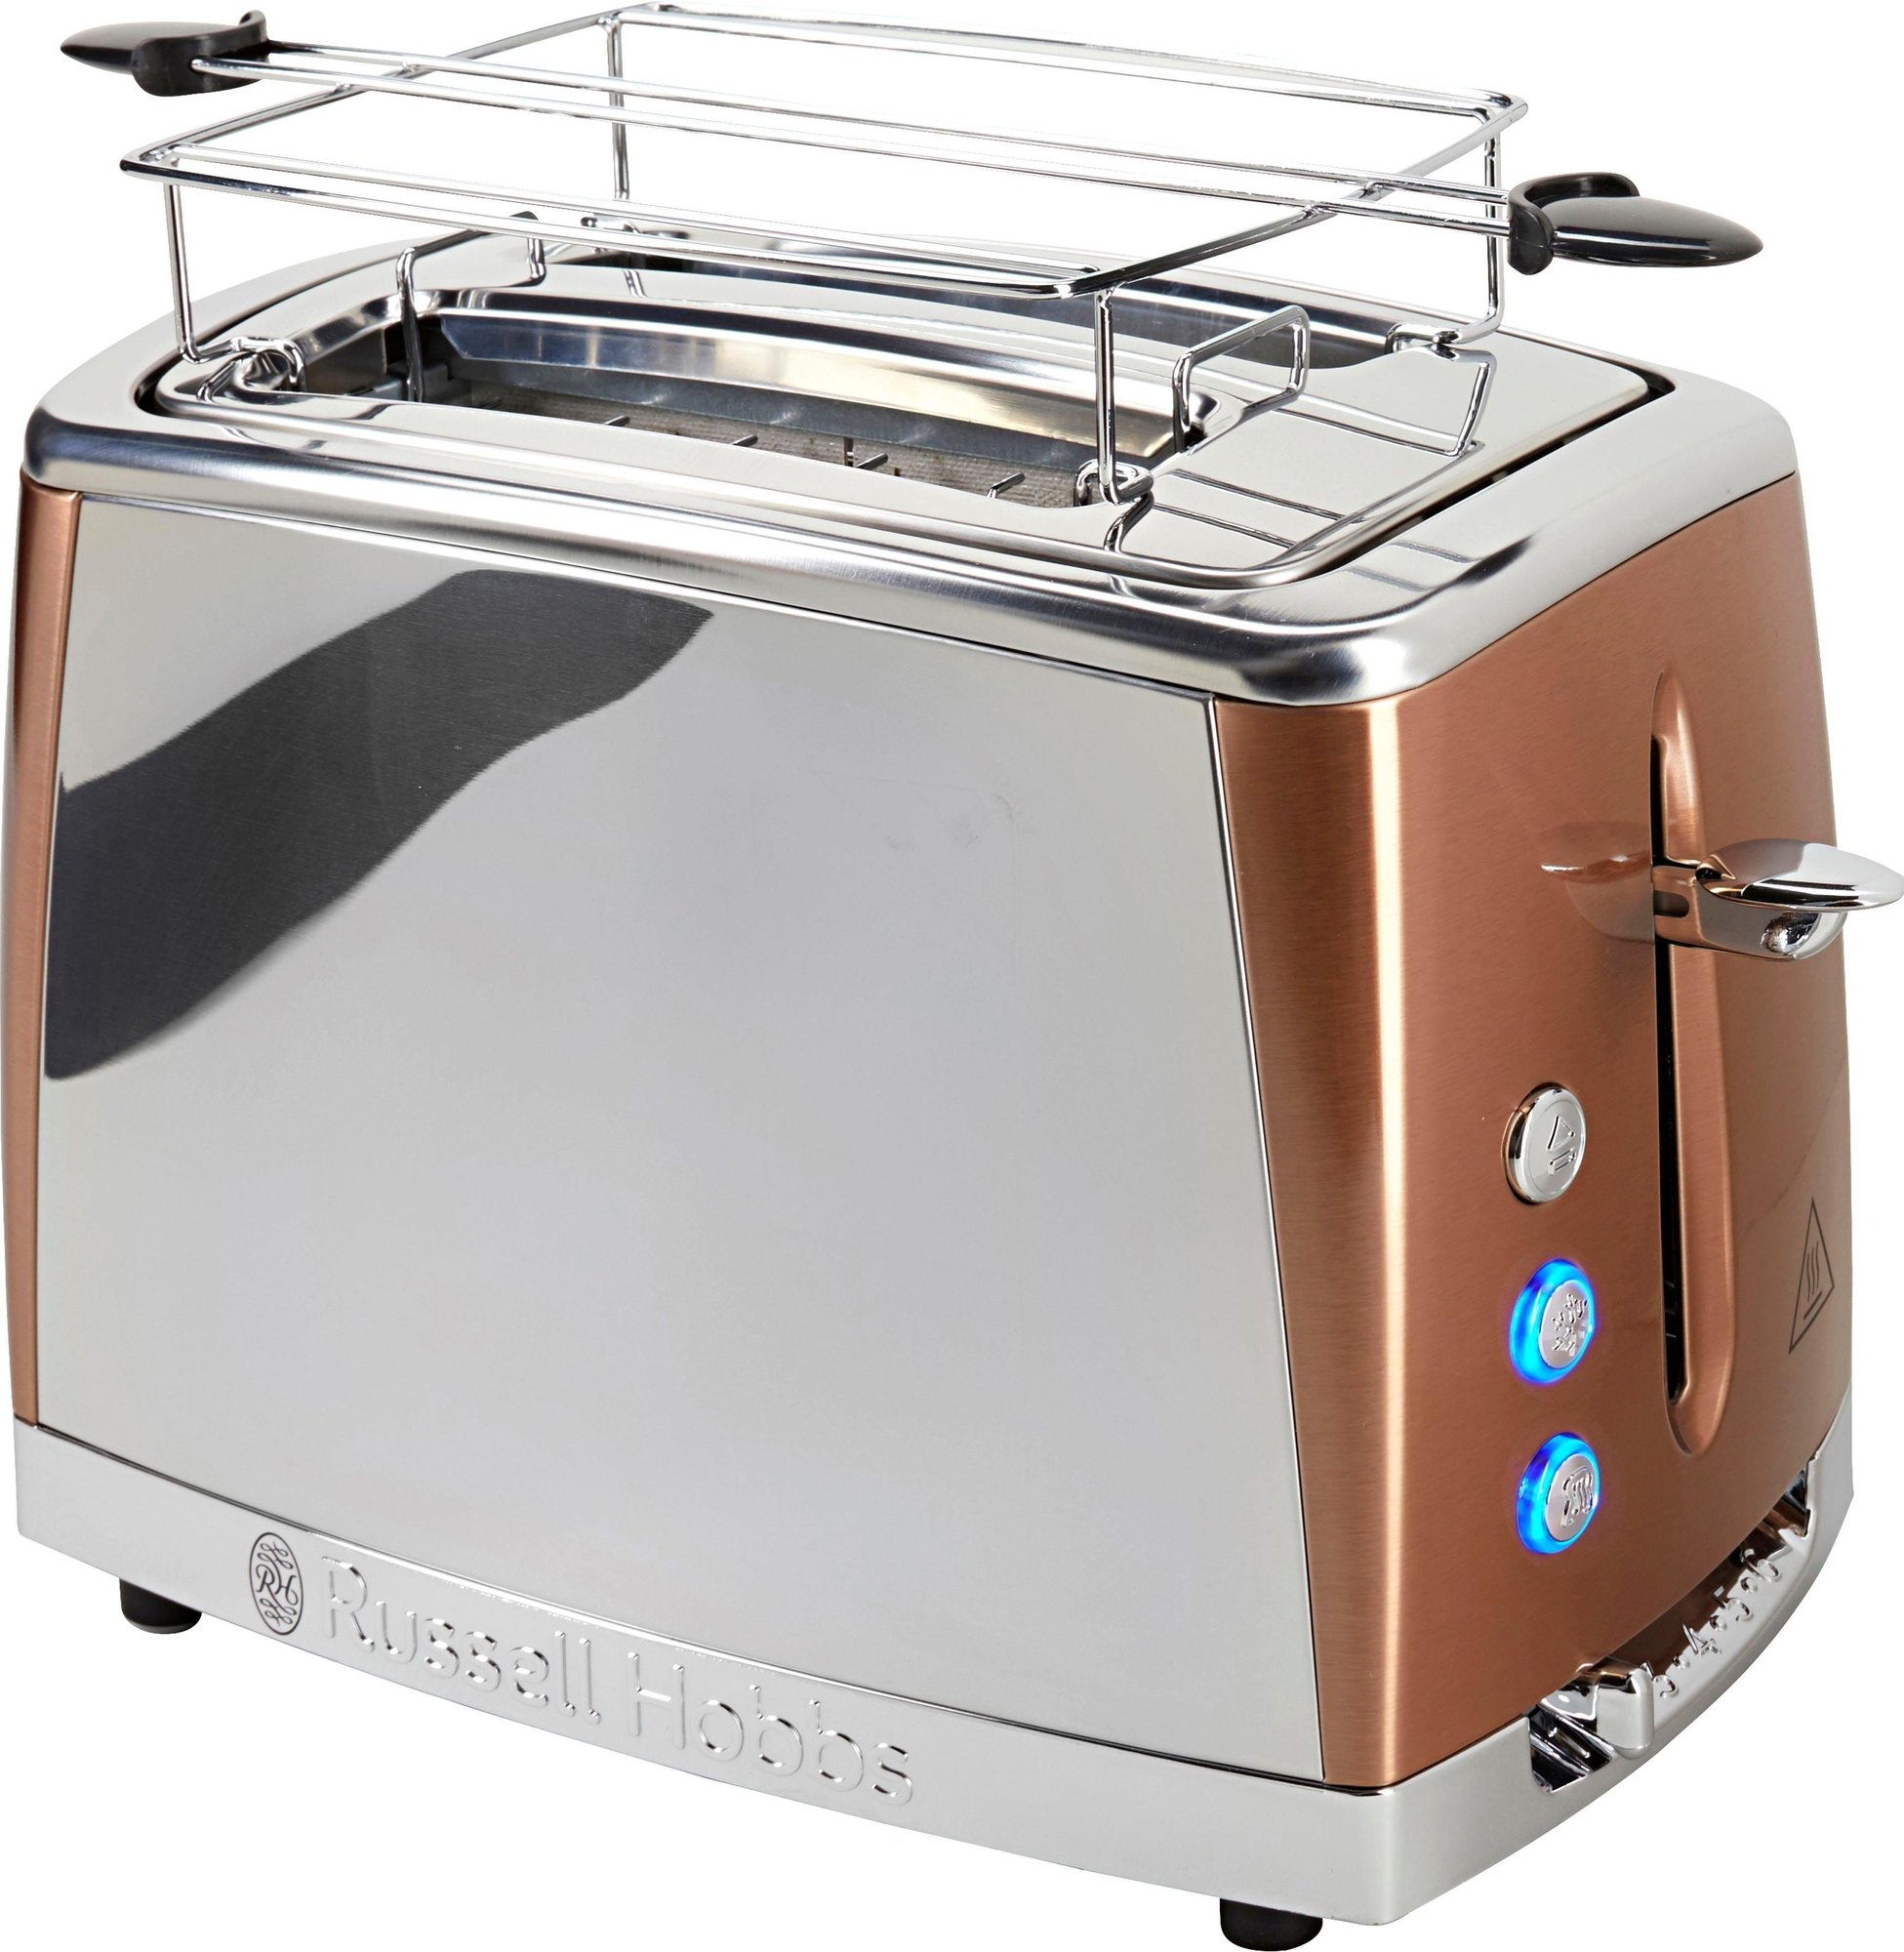 ab (Dezember 24290-56 Luna copper - 56,89 € 2023) Russell Test Hobbs accents